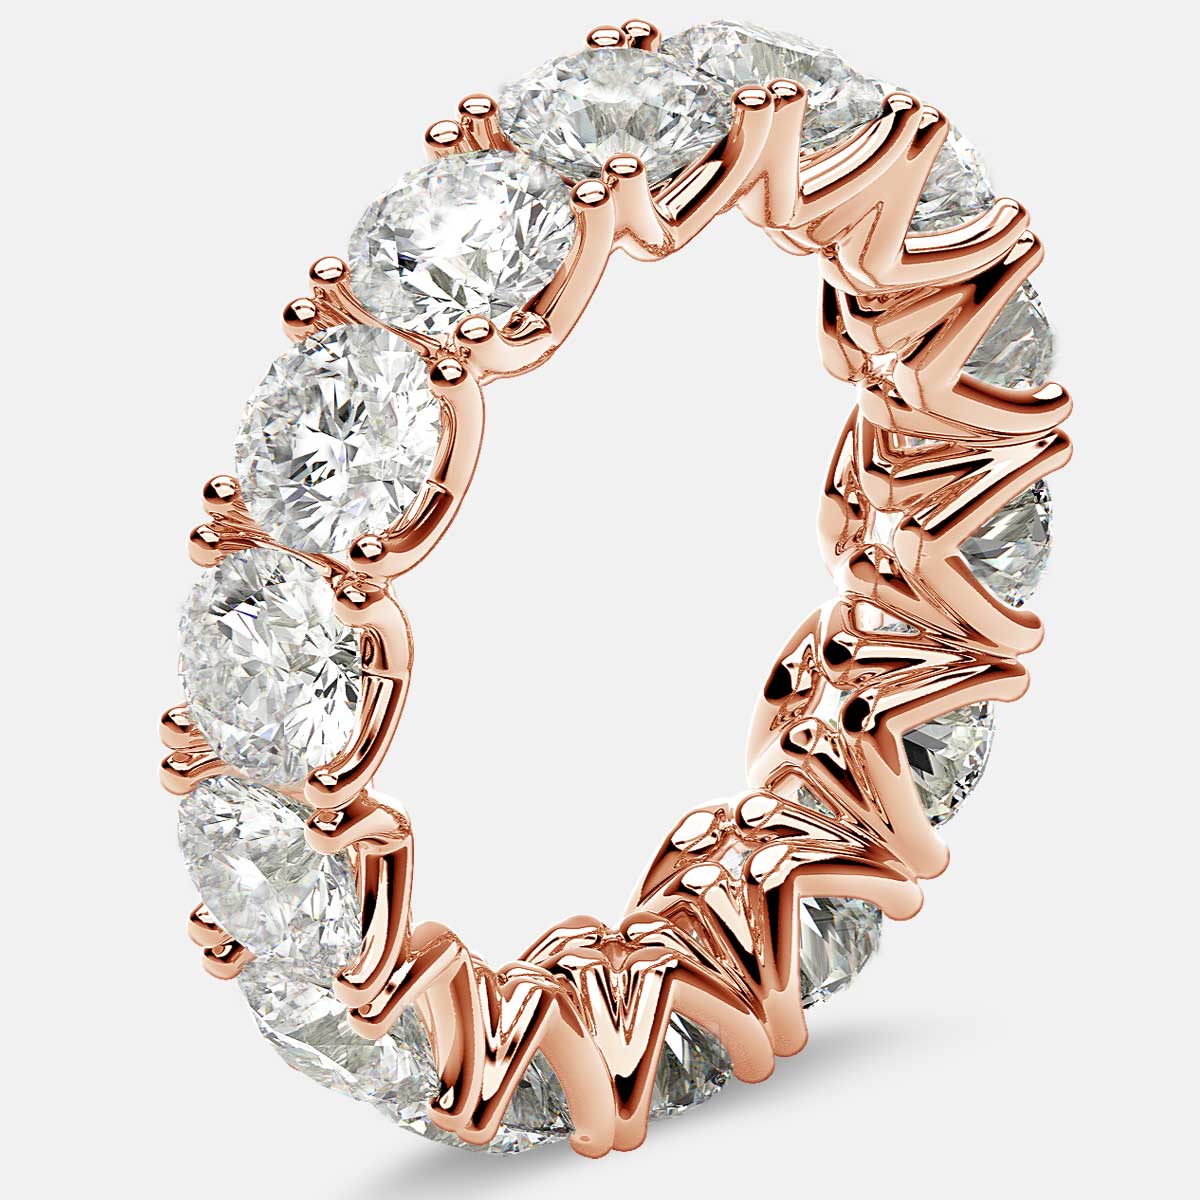 Curved V-Prong Eternity Ring with Round Diamonds in 18k Rose Gold